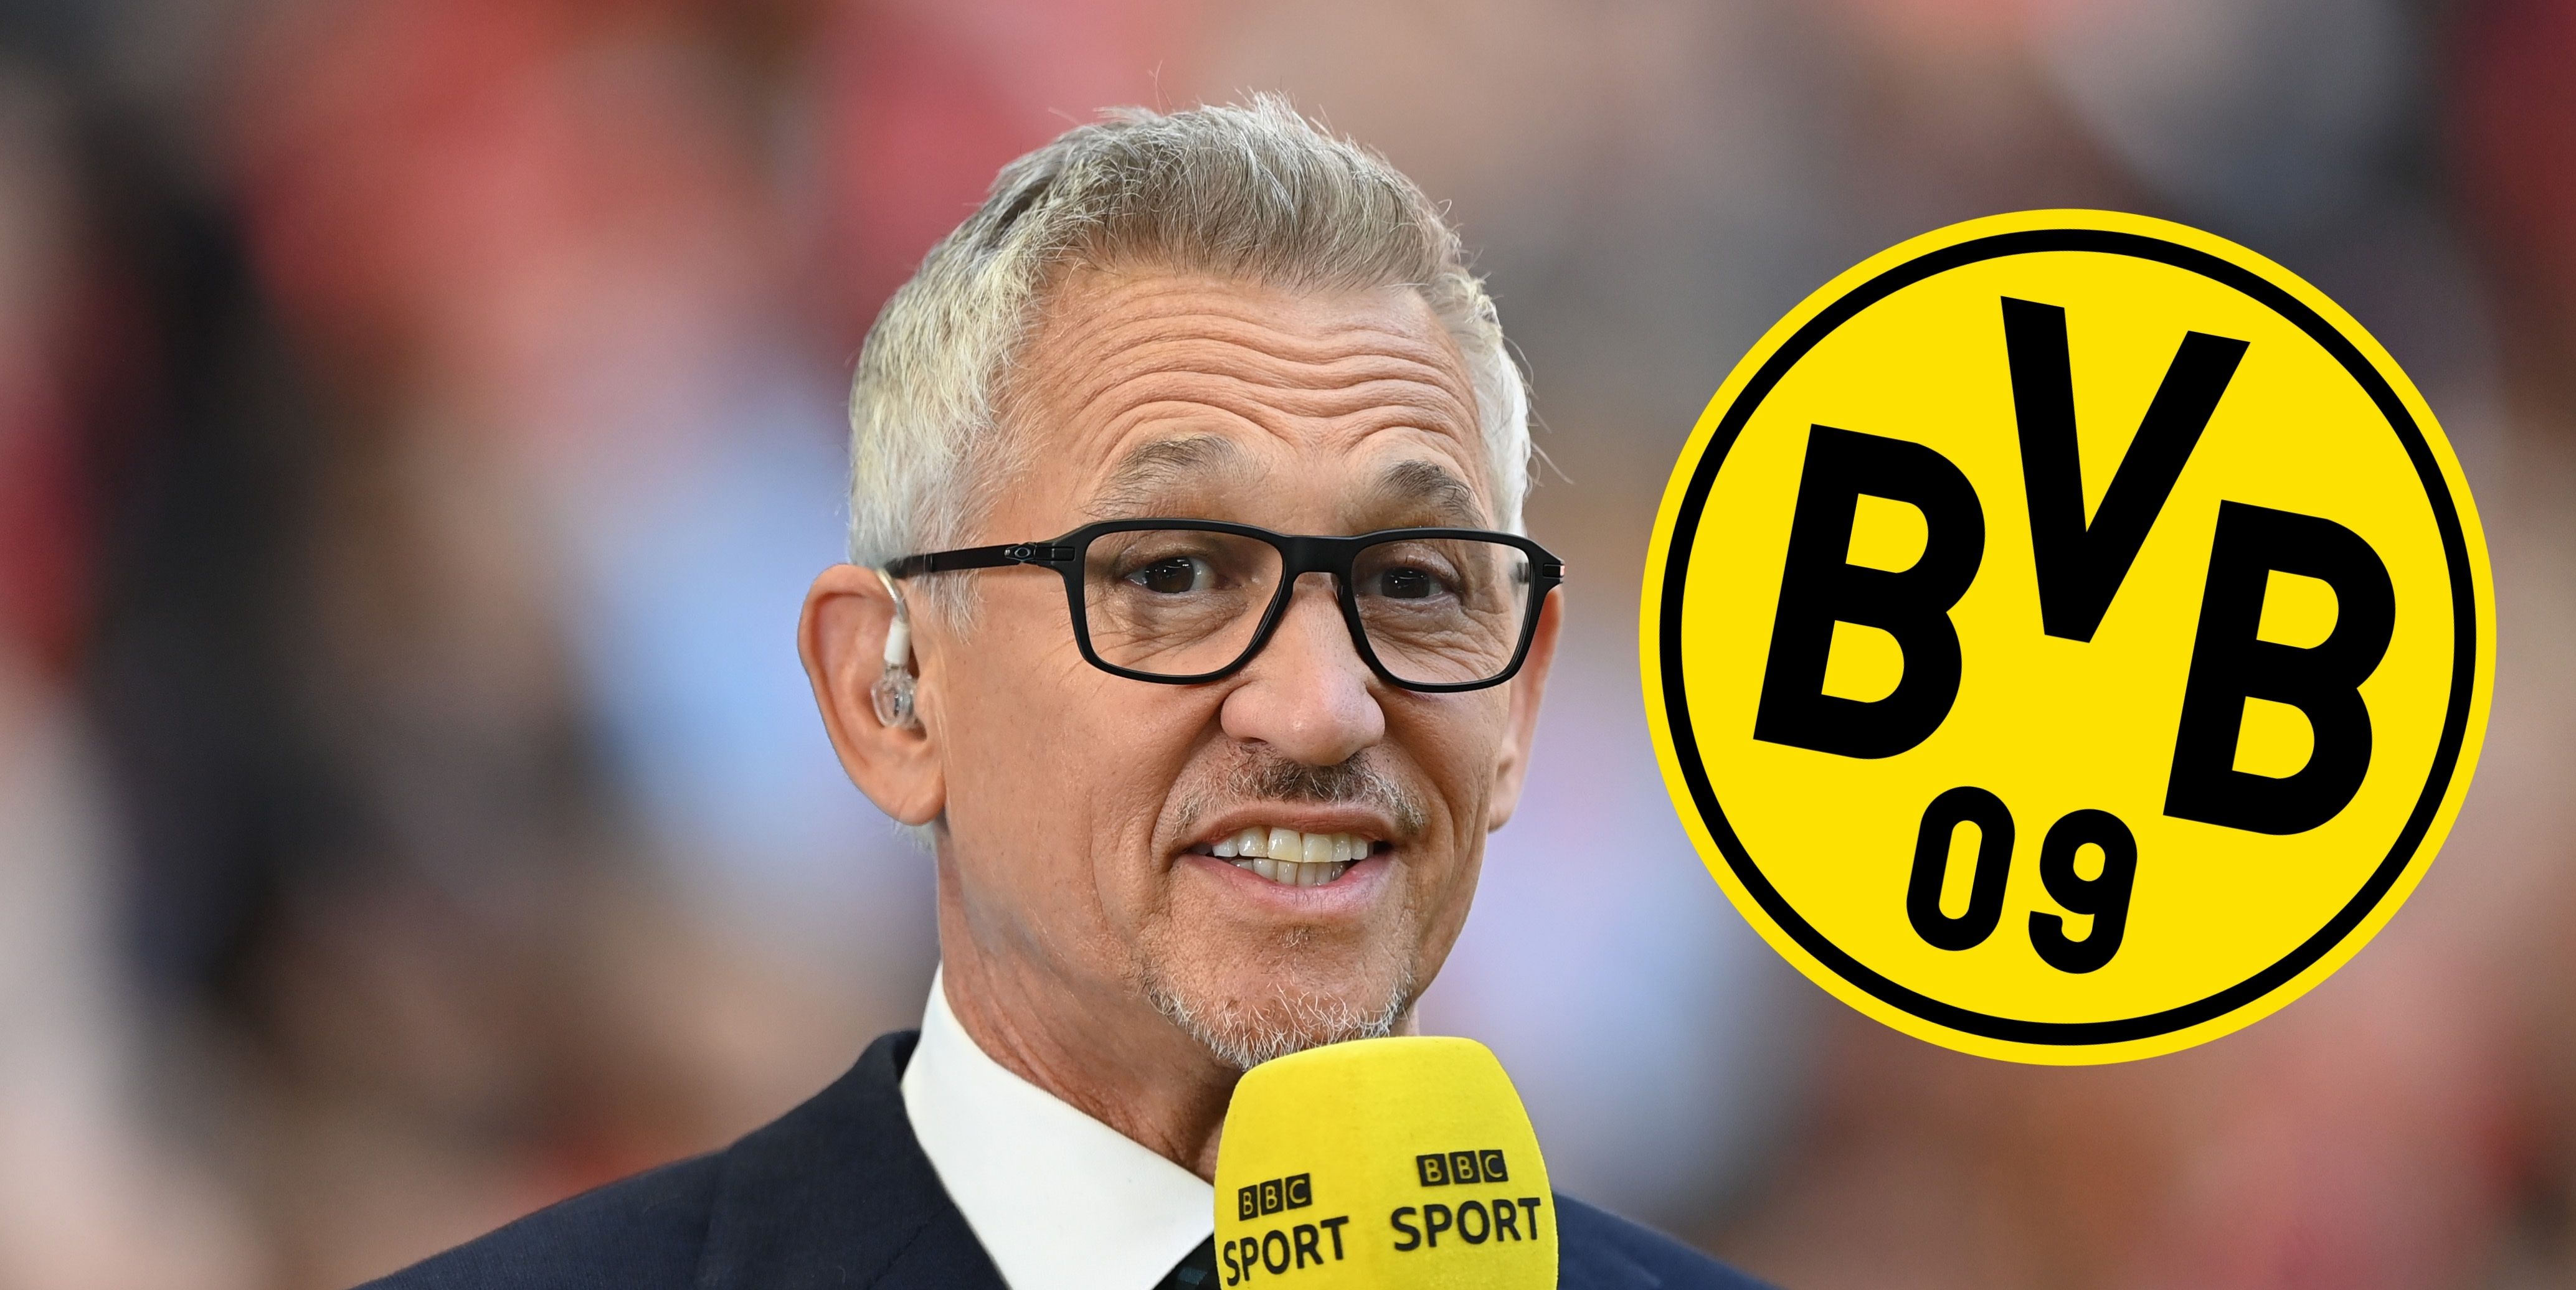 Gary Lineker backs ‘incredibly impressive’ Liverpool target to become ‘a truly great footballer’